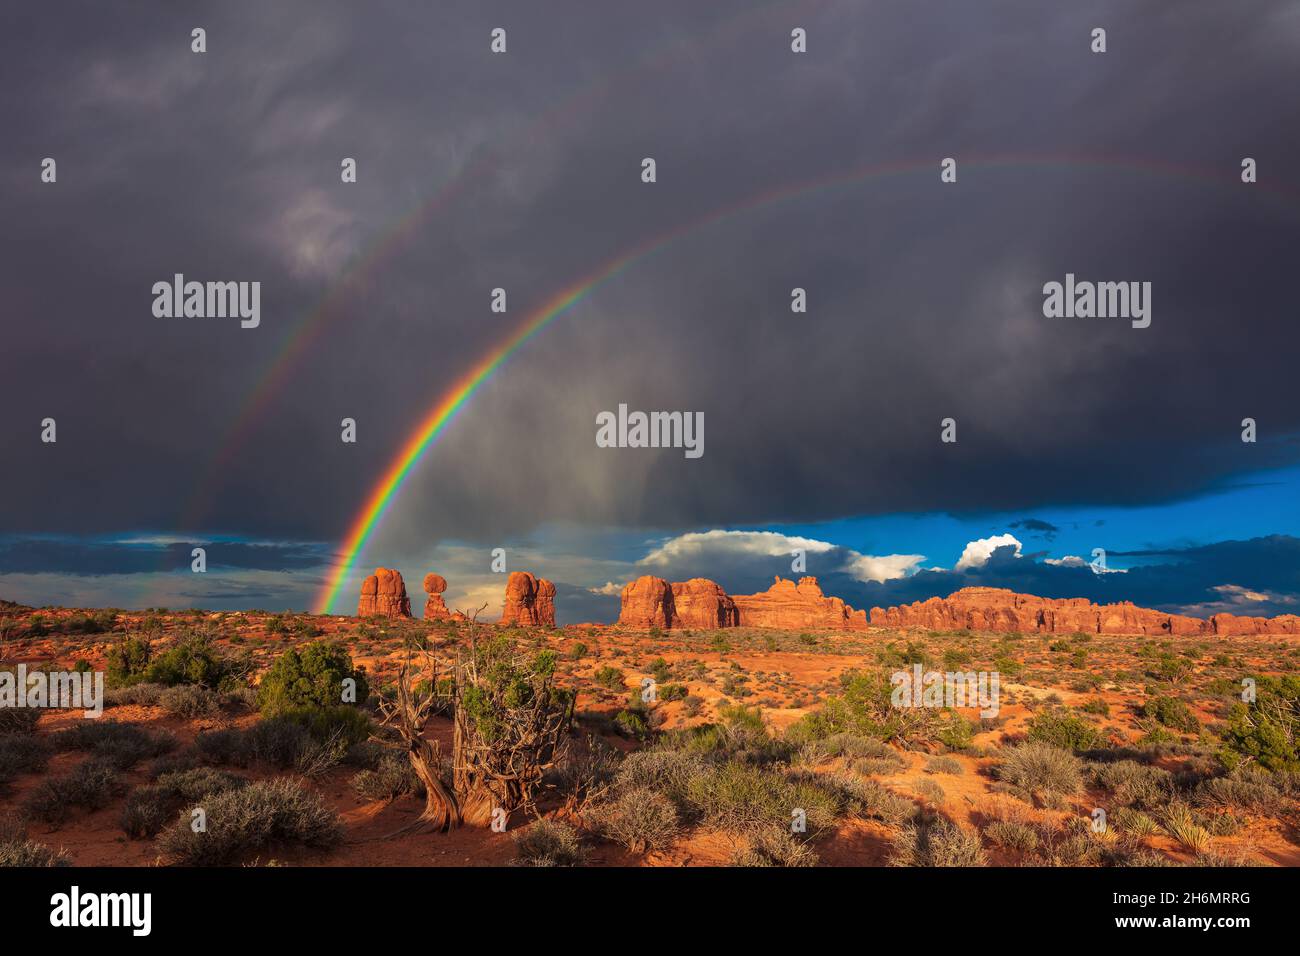 Double rainbow over Balanced Rock in Arches National Park, Utah Stock Photo